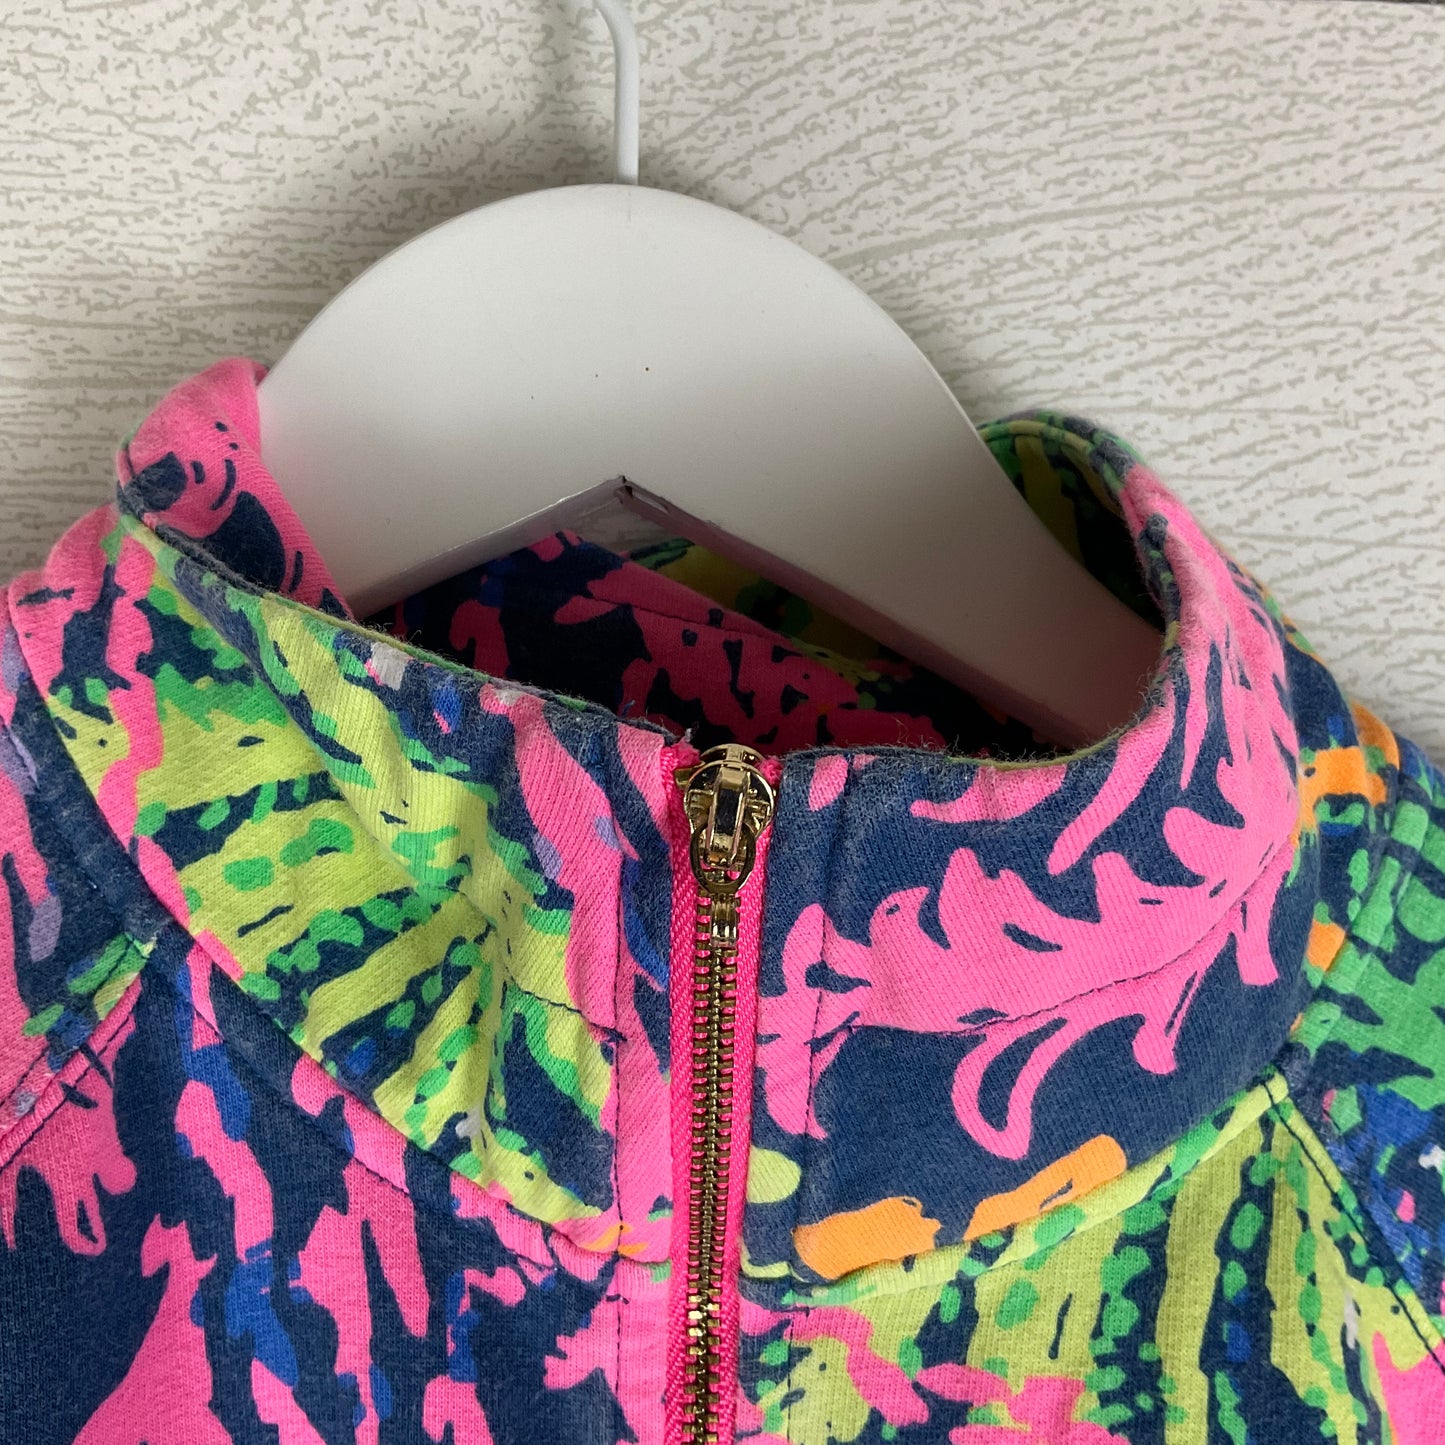 Jacket Designer By Lilly Pulitzer  Size: Xs